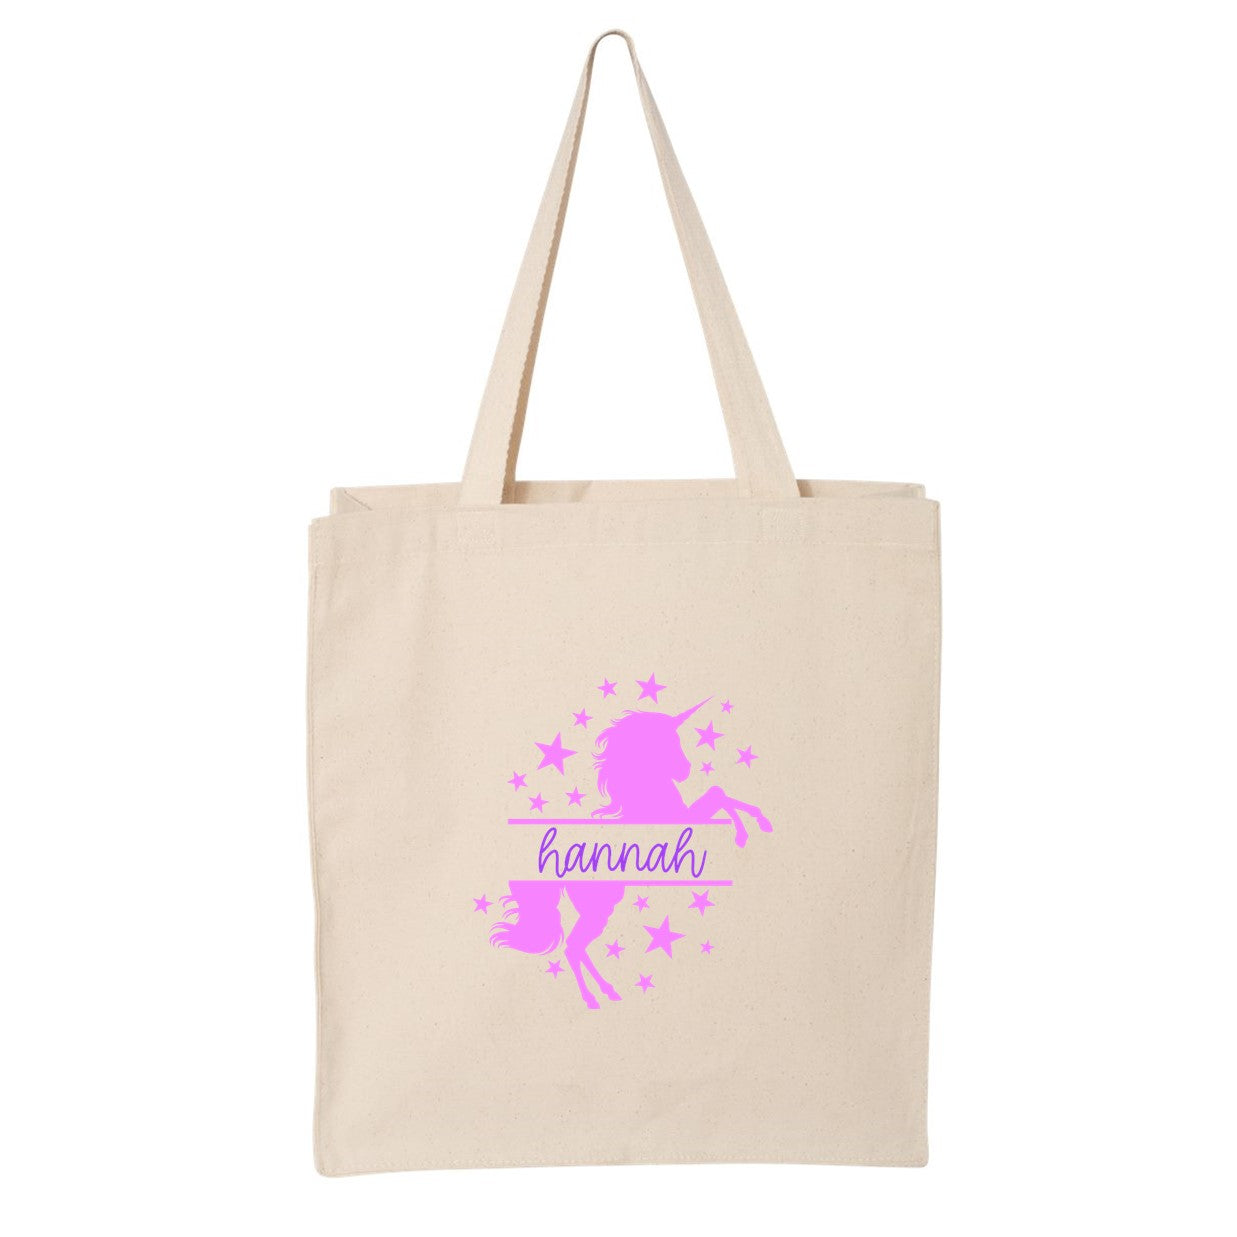 Unicorn Tote Bag - Personalized with Name